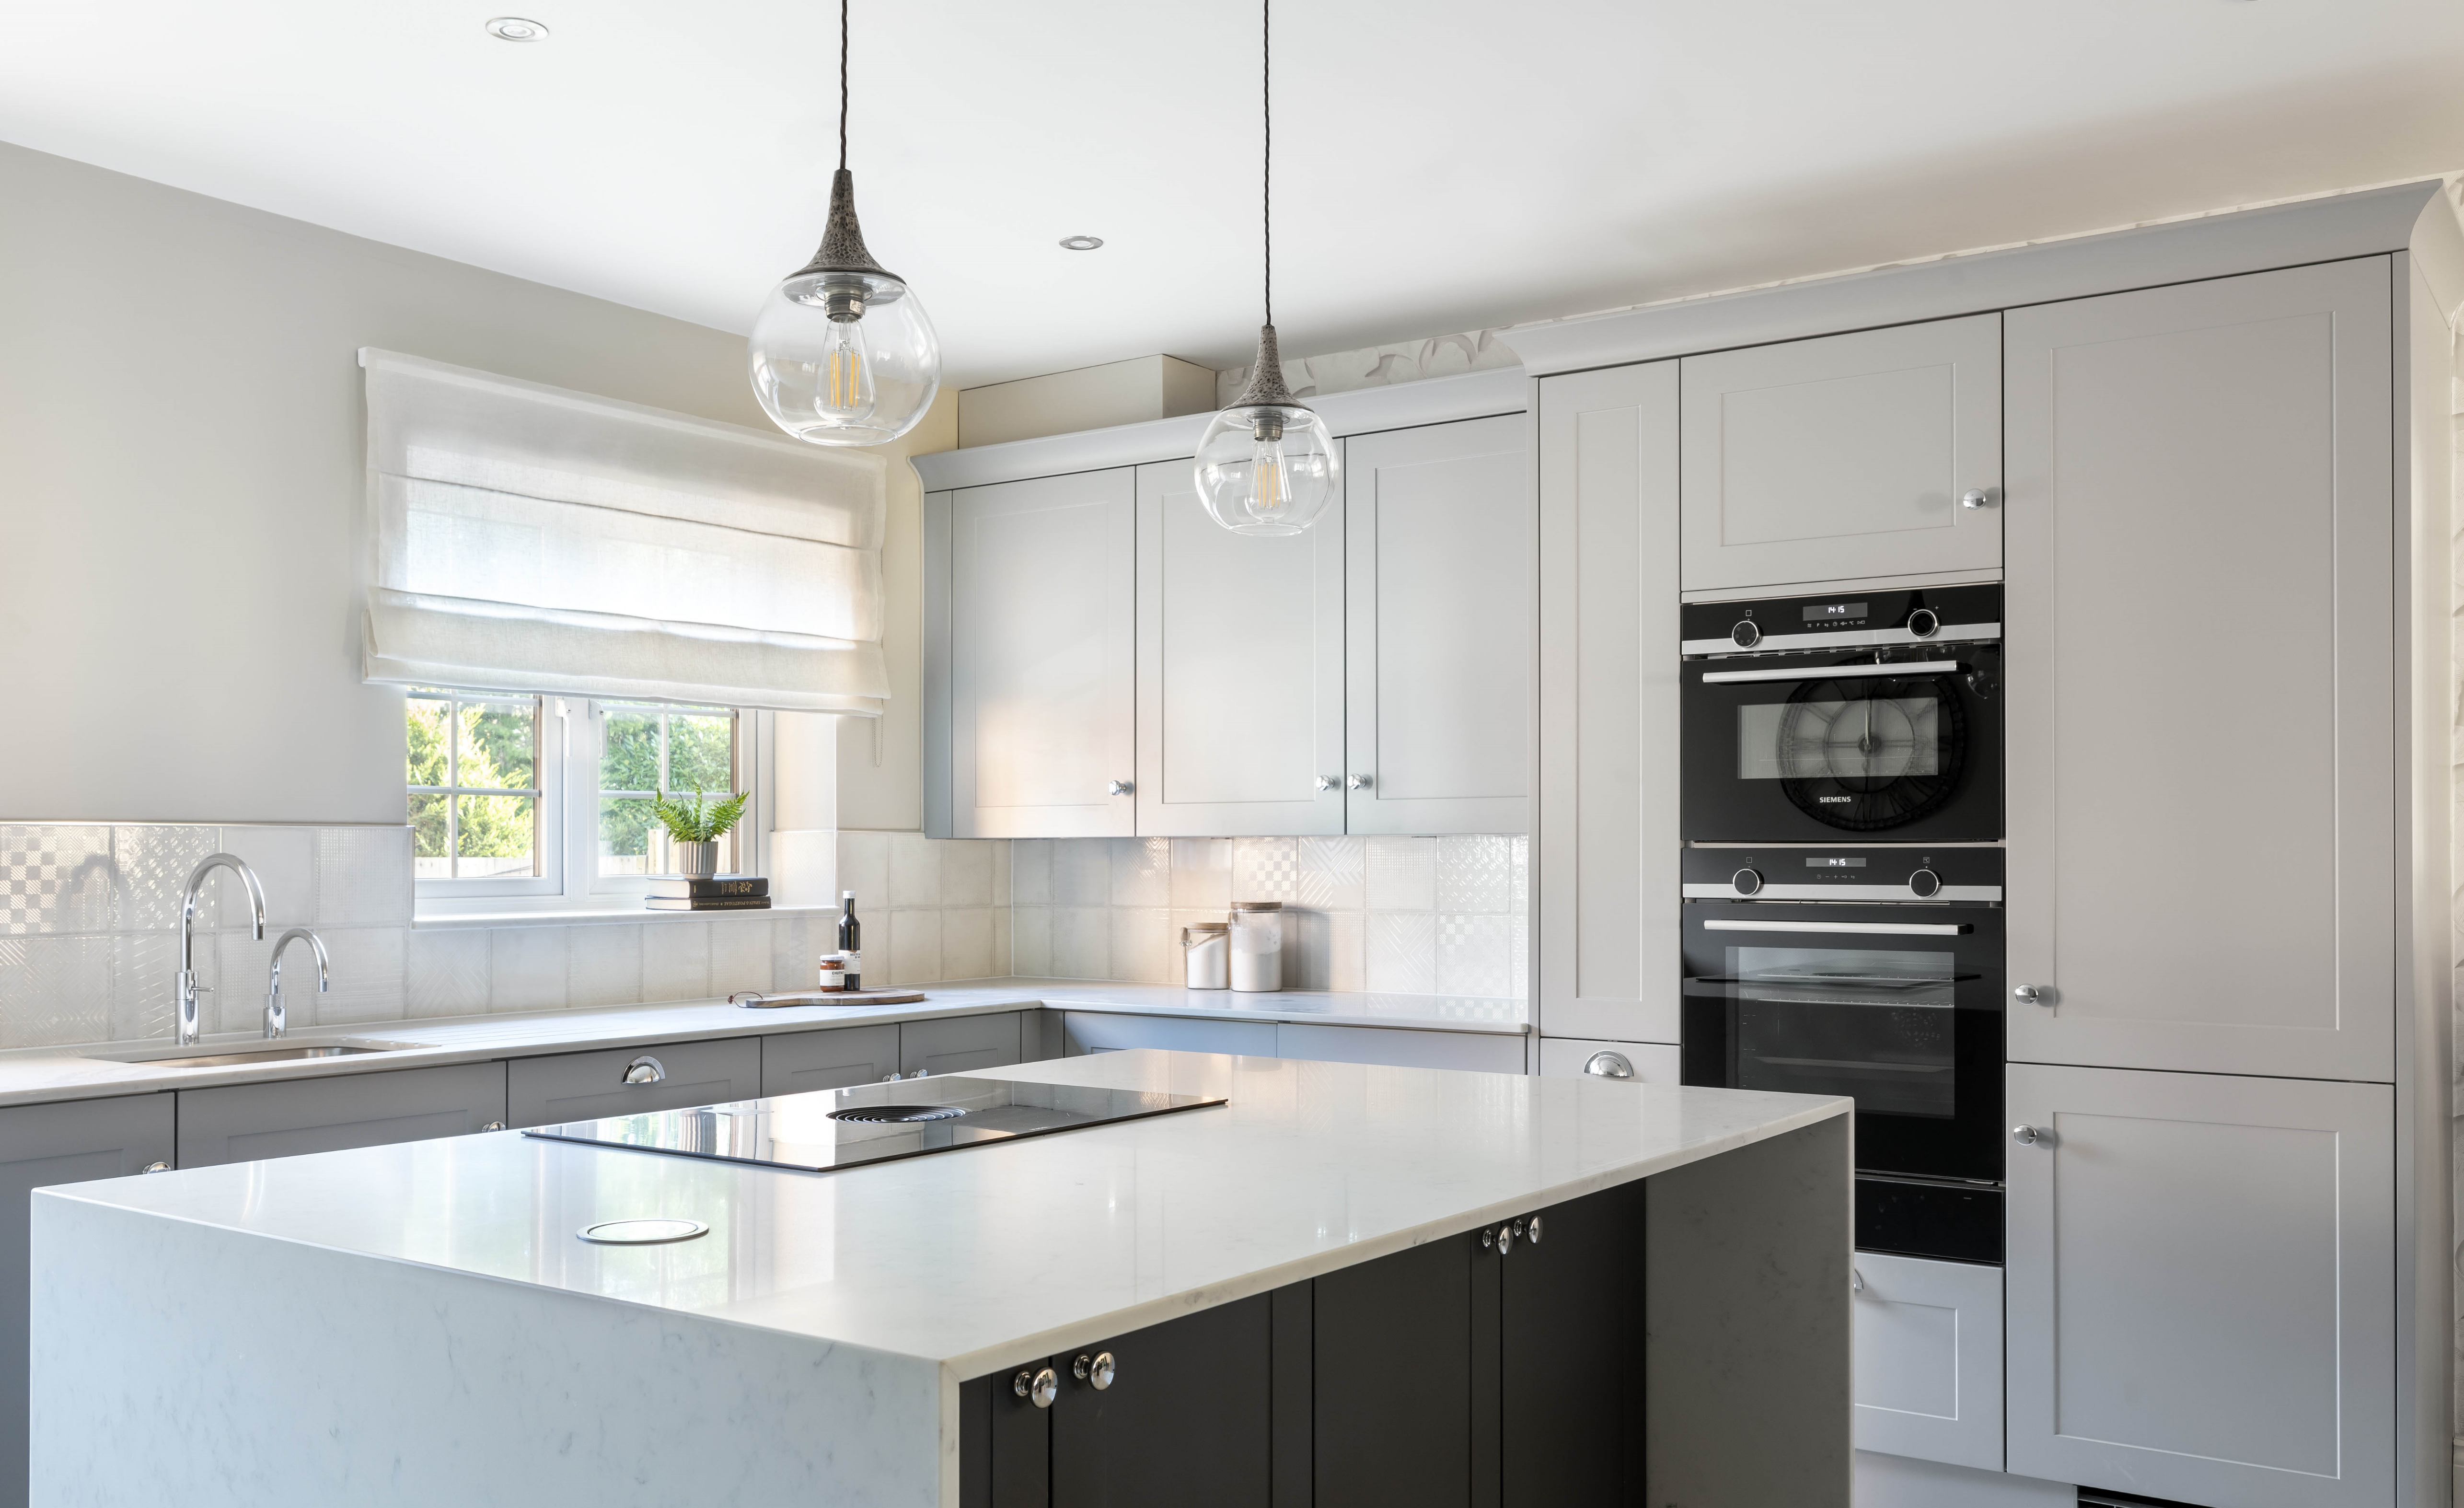 Featured image for “Watermark Kitchens Working With Local Developers”